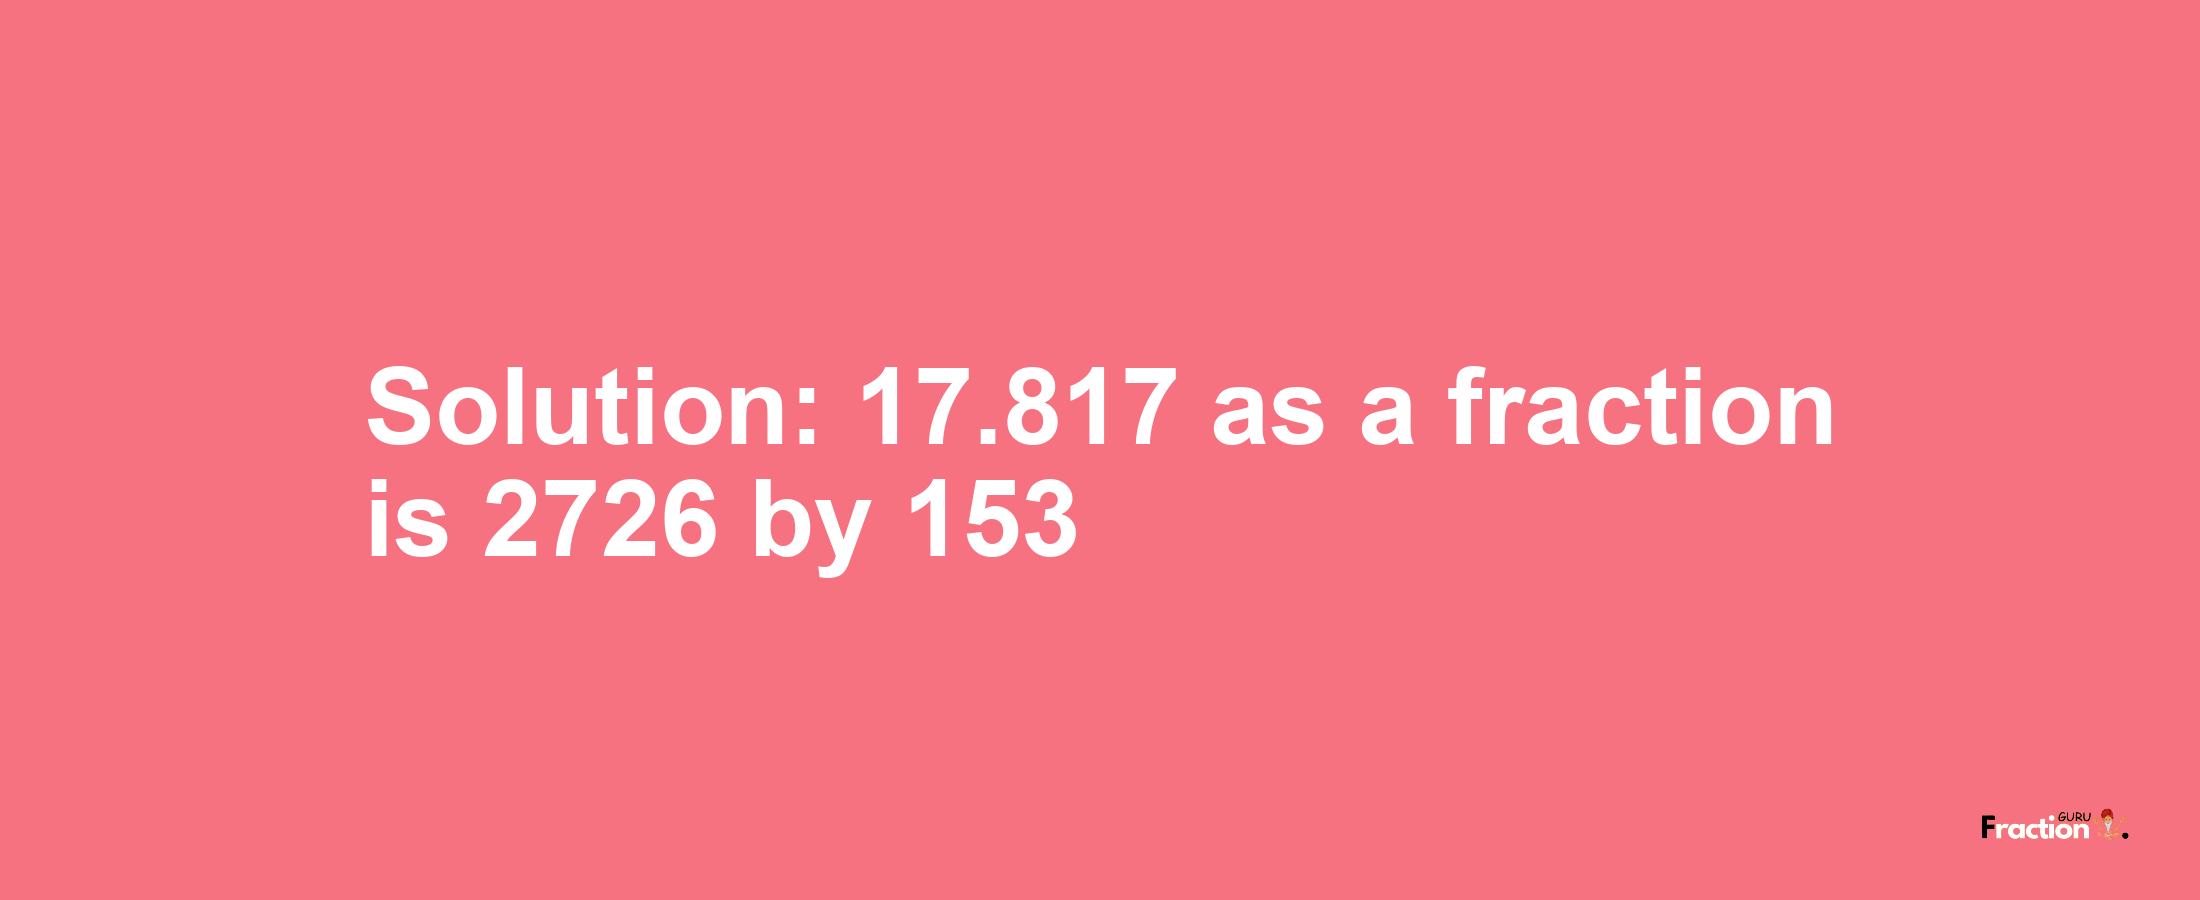 Solution:17.817 as a fraction is 2726/153